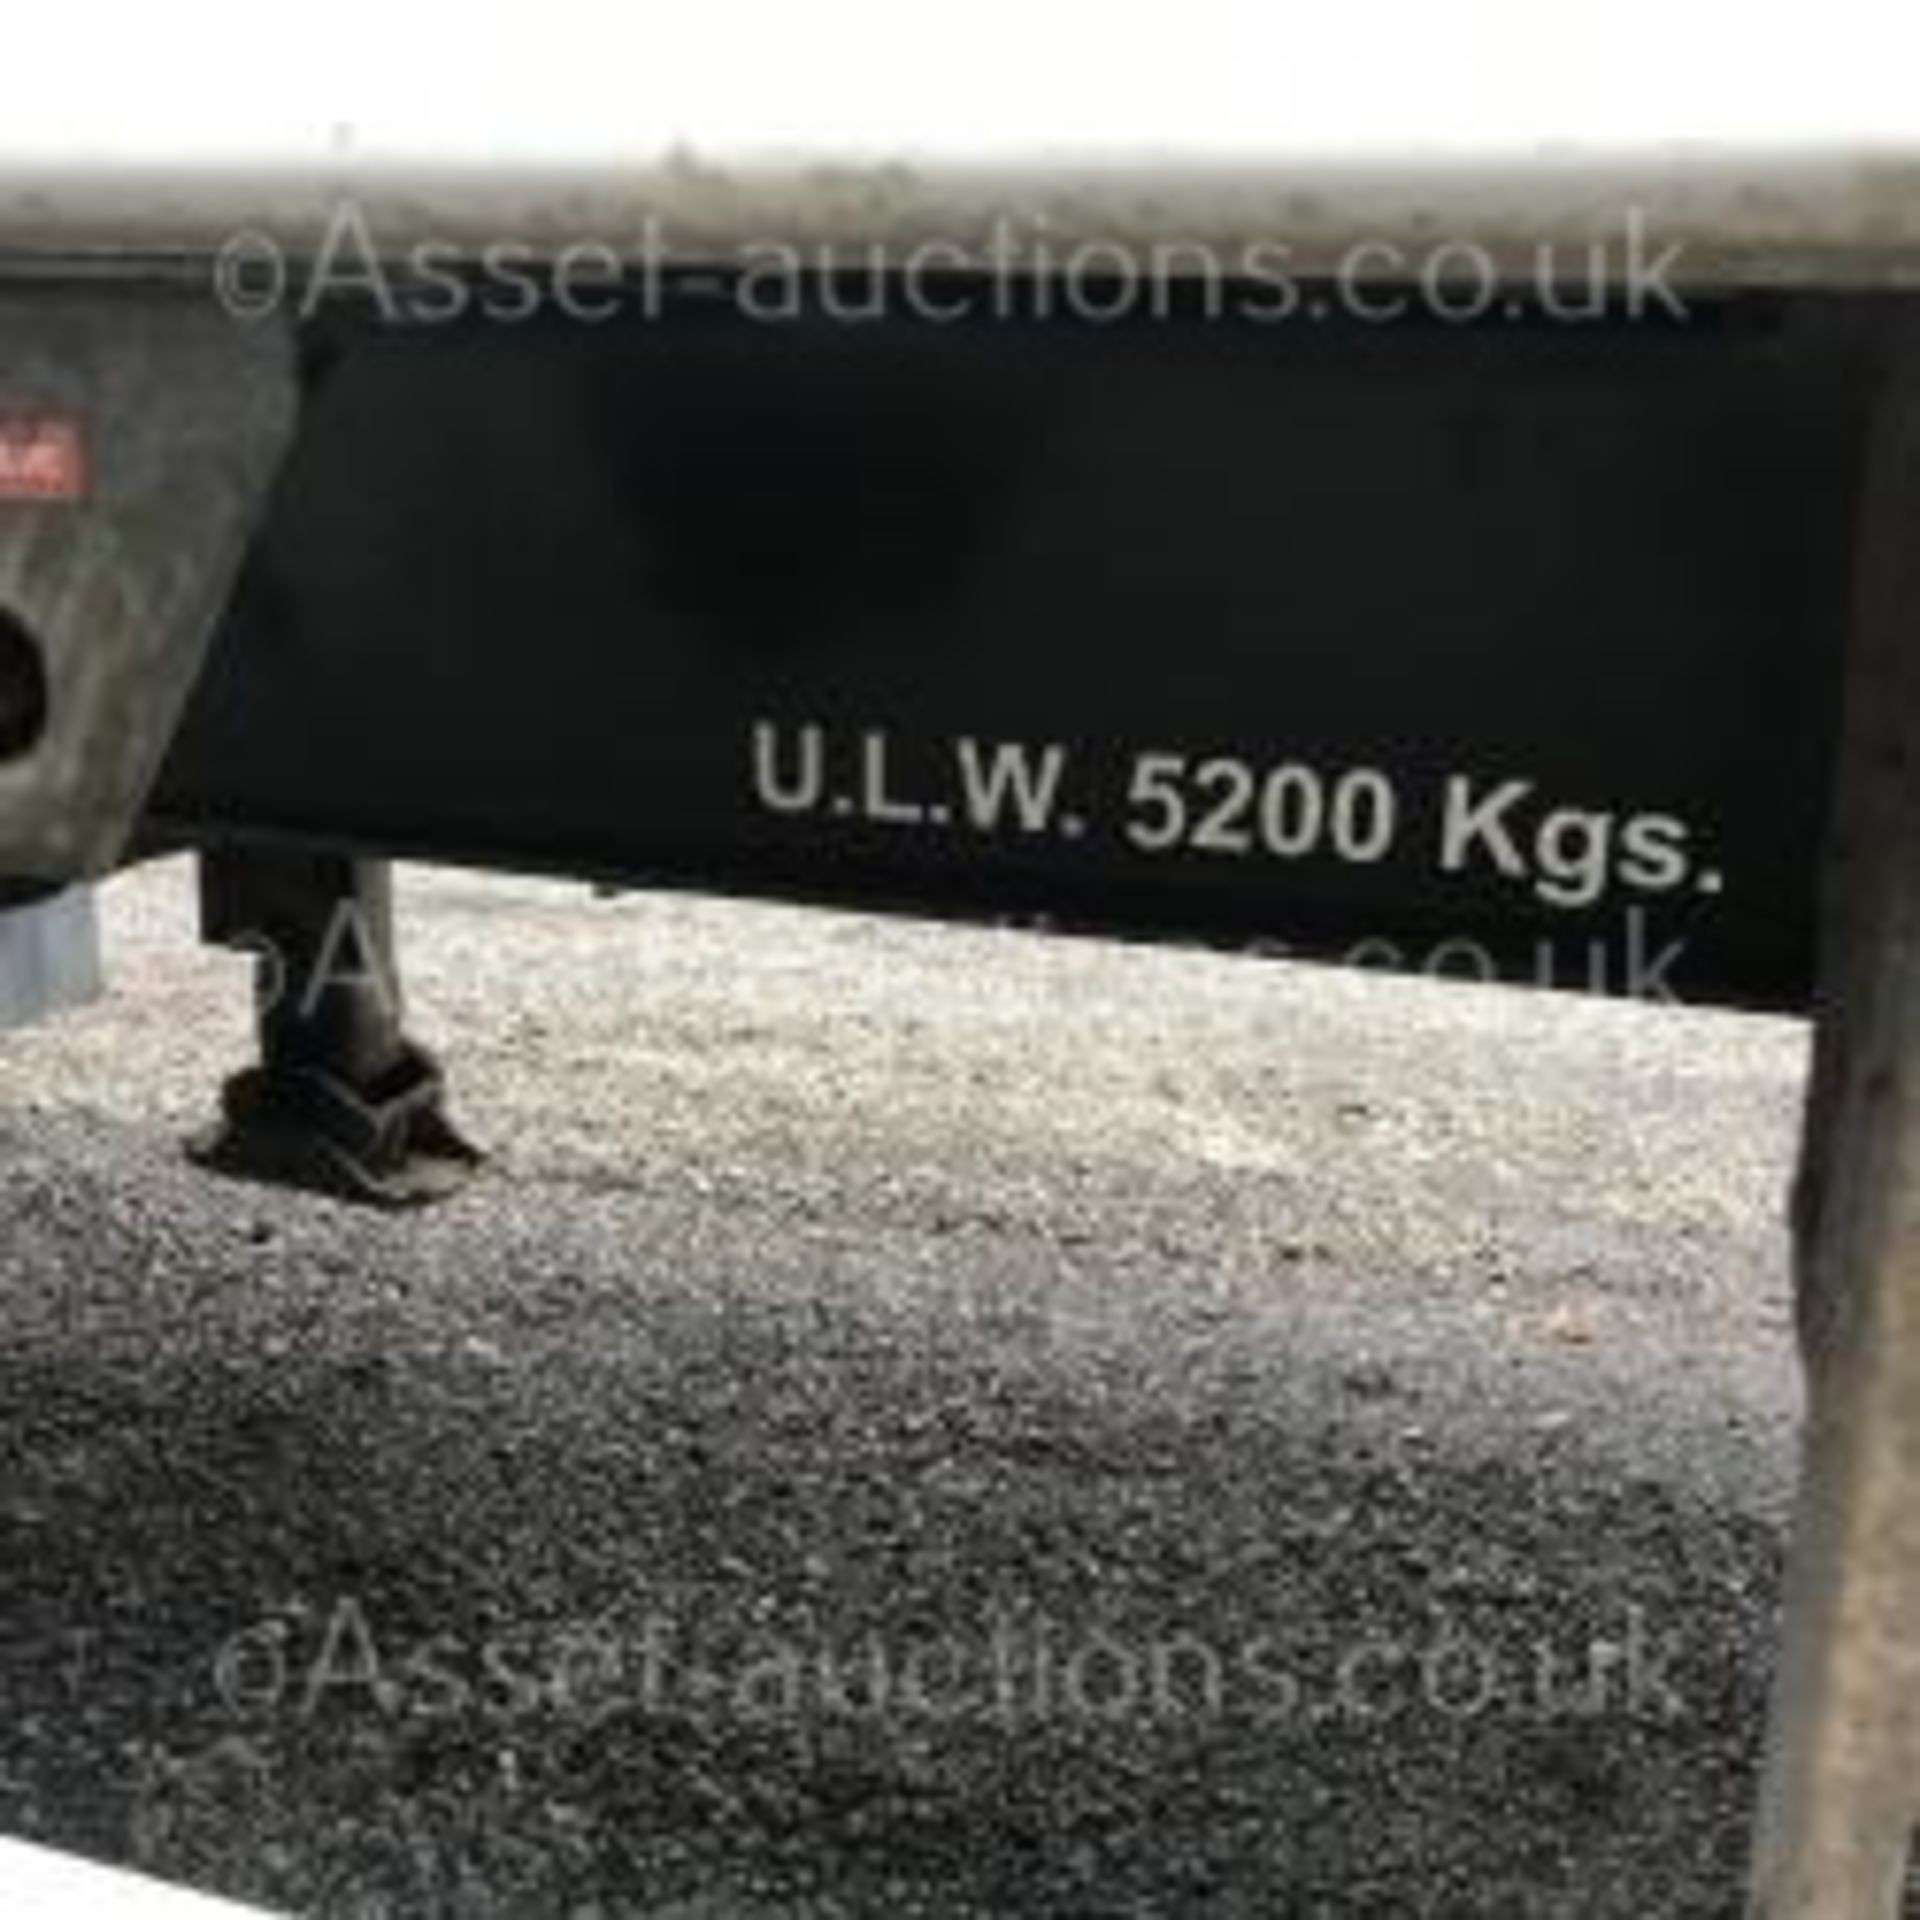 2007 DONBUR SINGLE AXLE TRAILER WITH TAIL LIFT, GOOD CONDITION *PLUS VAT* - Image 19 of 22